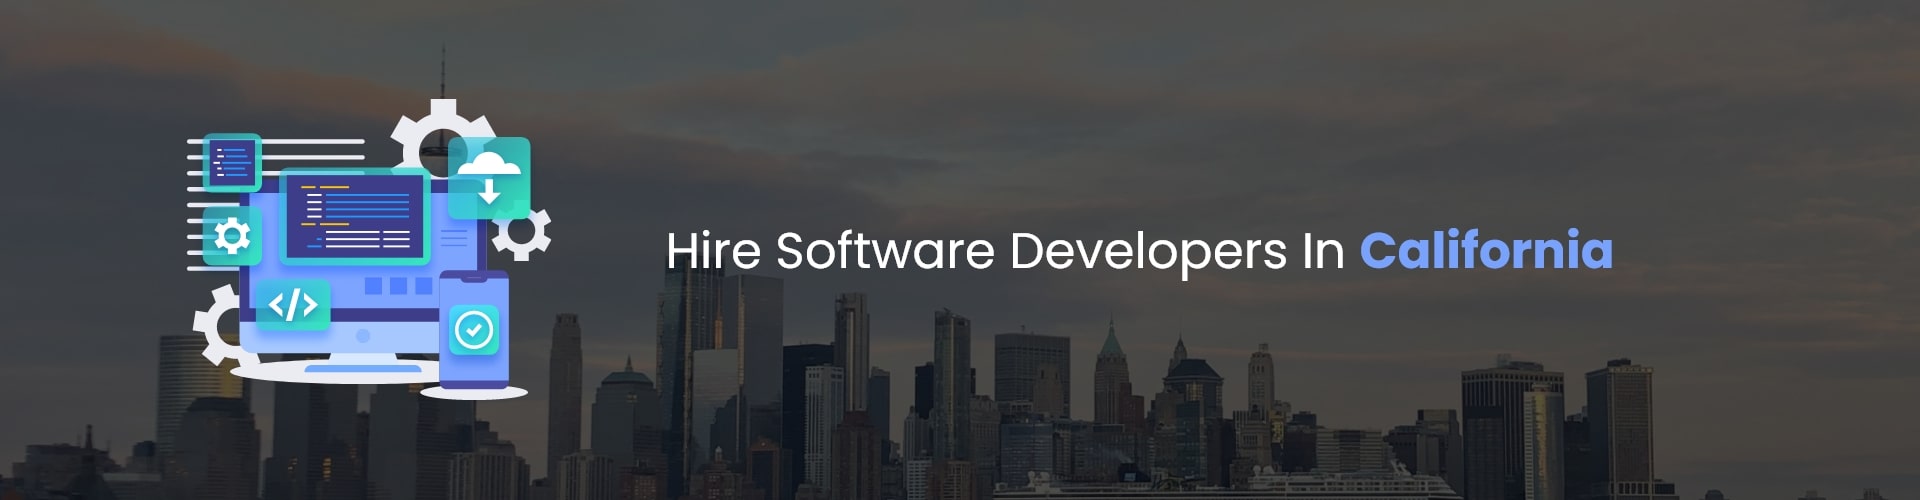 hire software developers in california